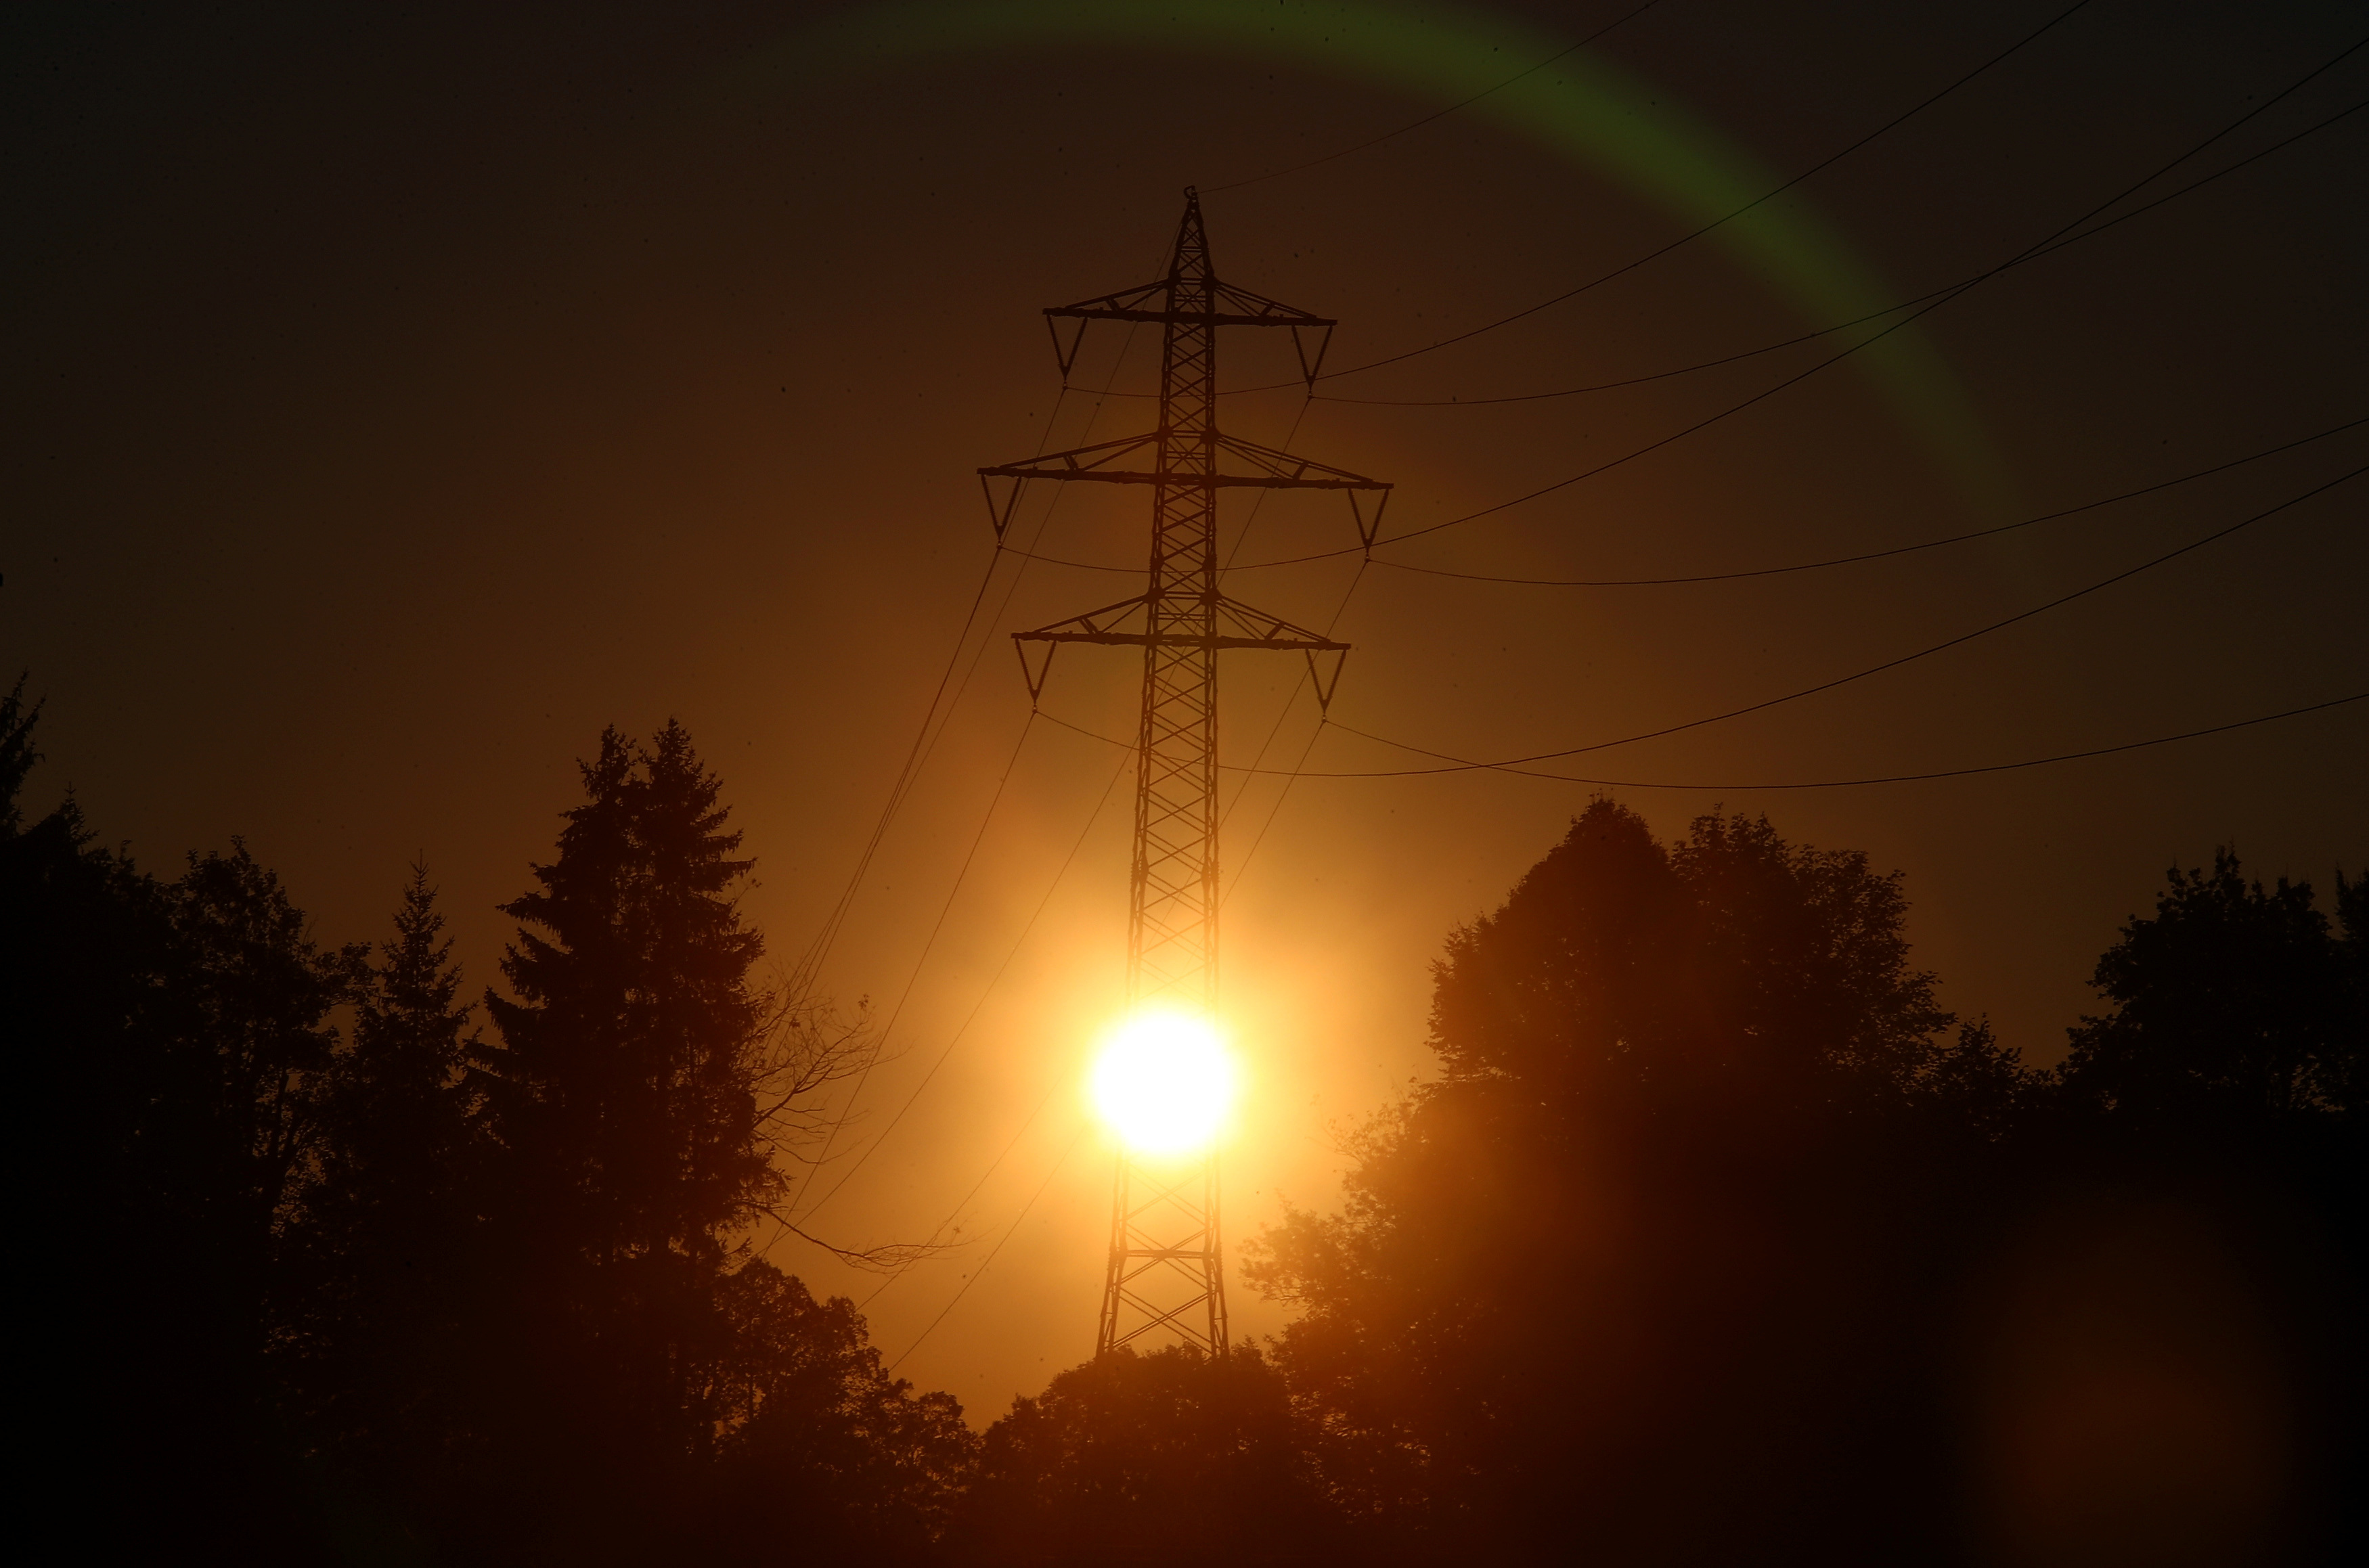 The sun rises behind high-voltage power lines and electricity pylons in Wall